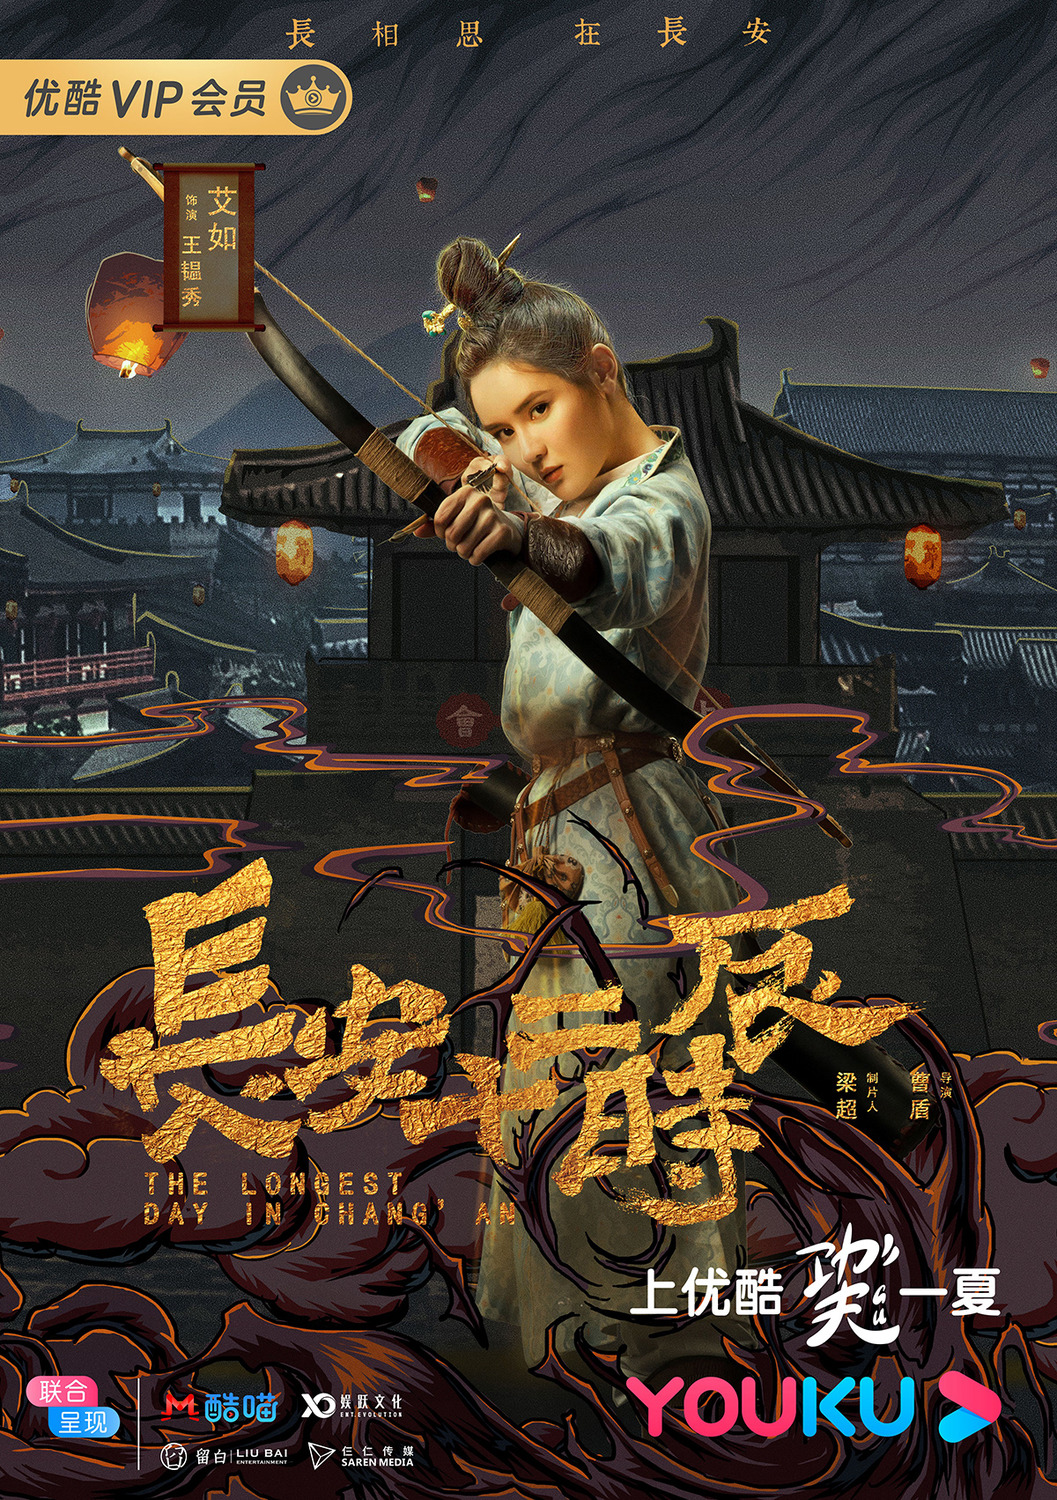 Extra Large TV Poster Image for Chang'an shi er shi chen (#14 of 18)